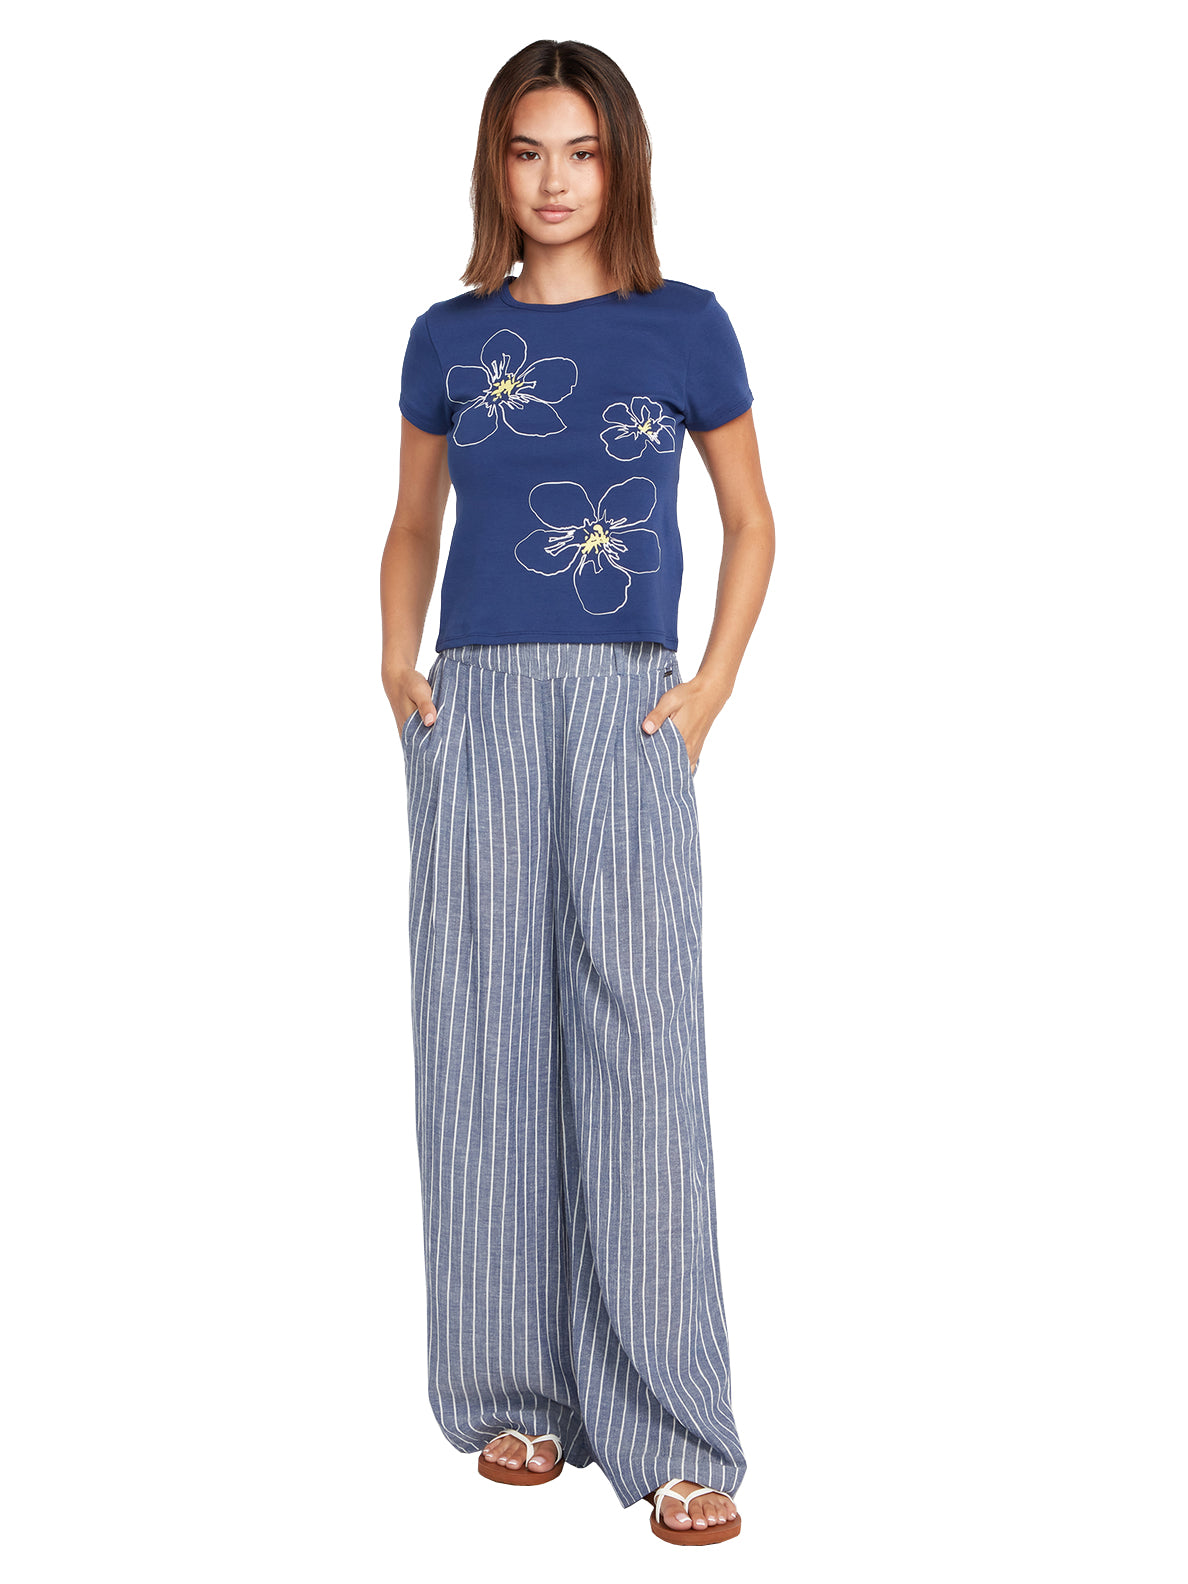 Volcom Coco Ho Trouser Pant NVY S